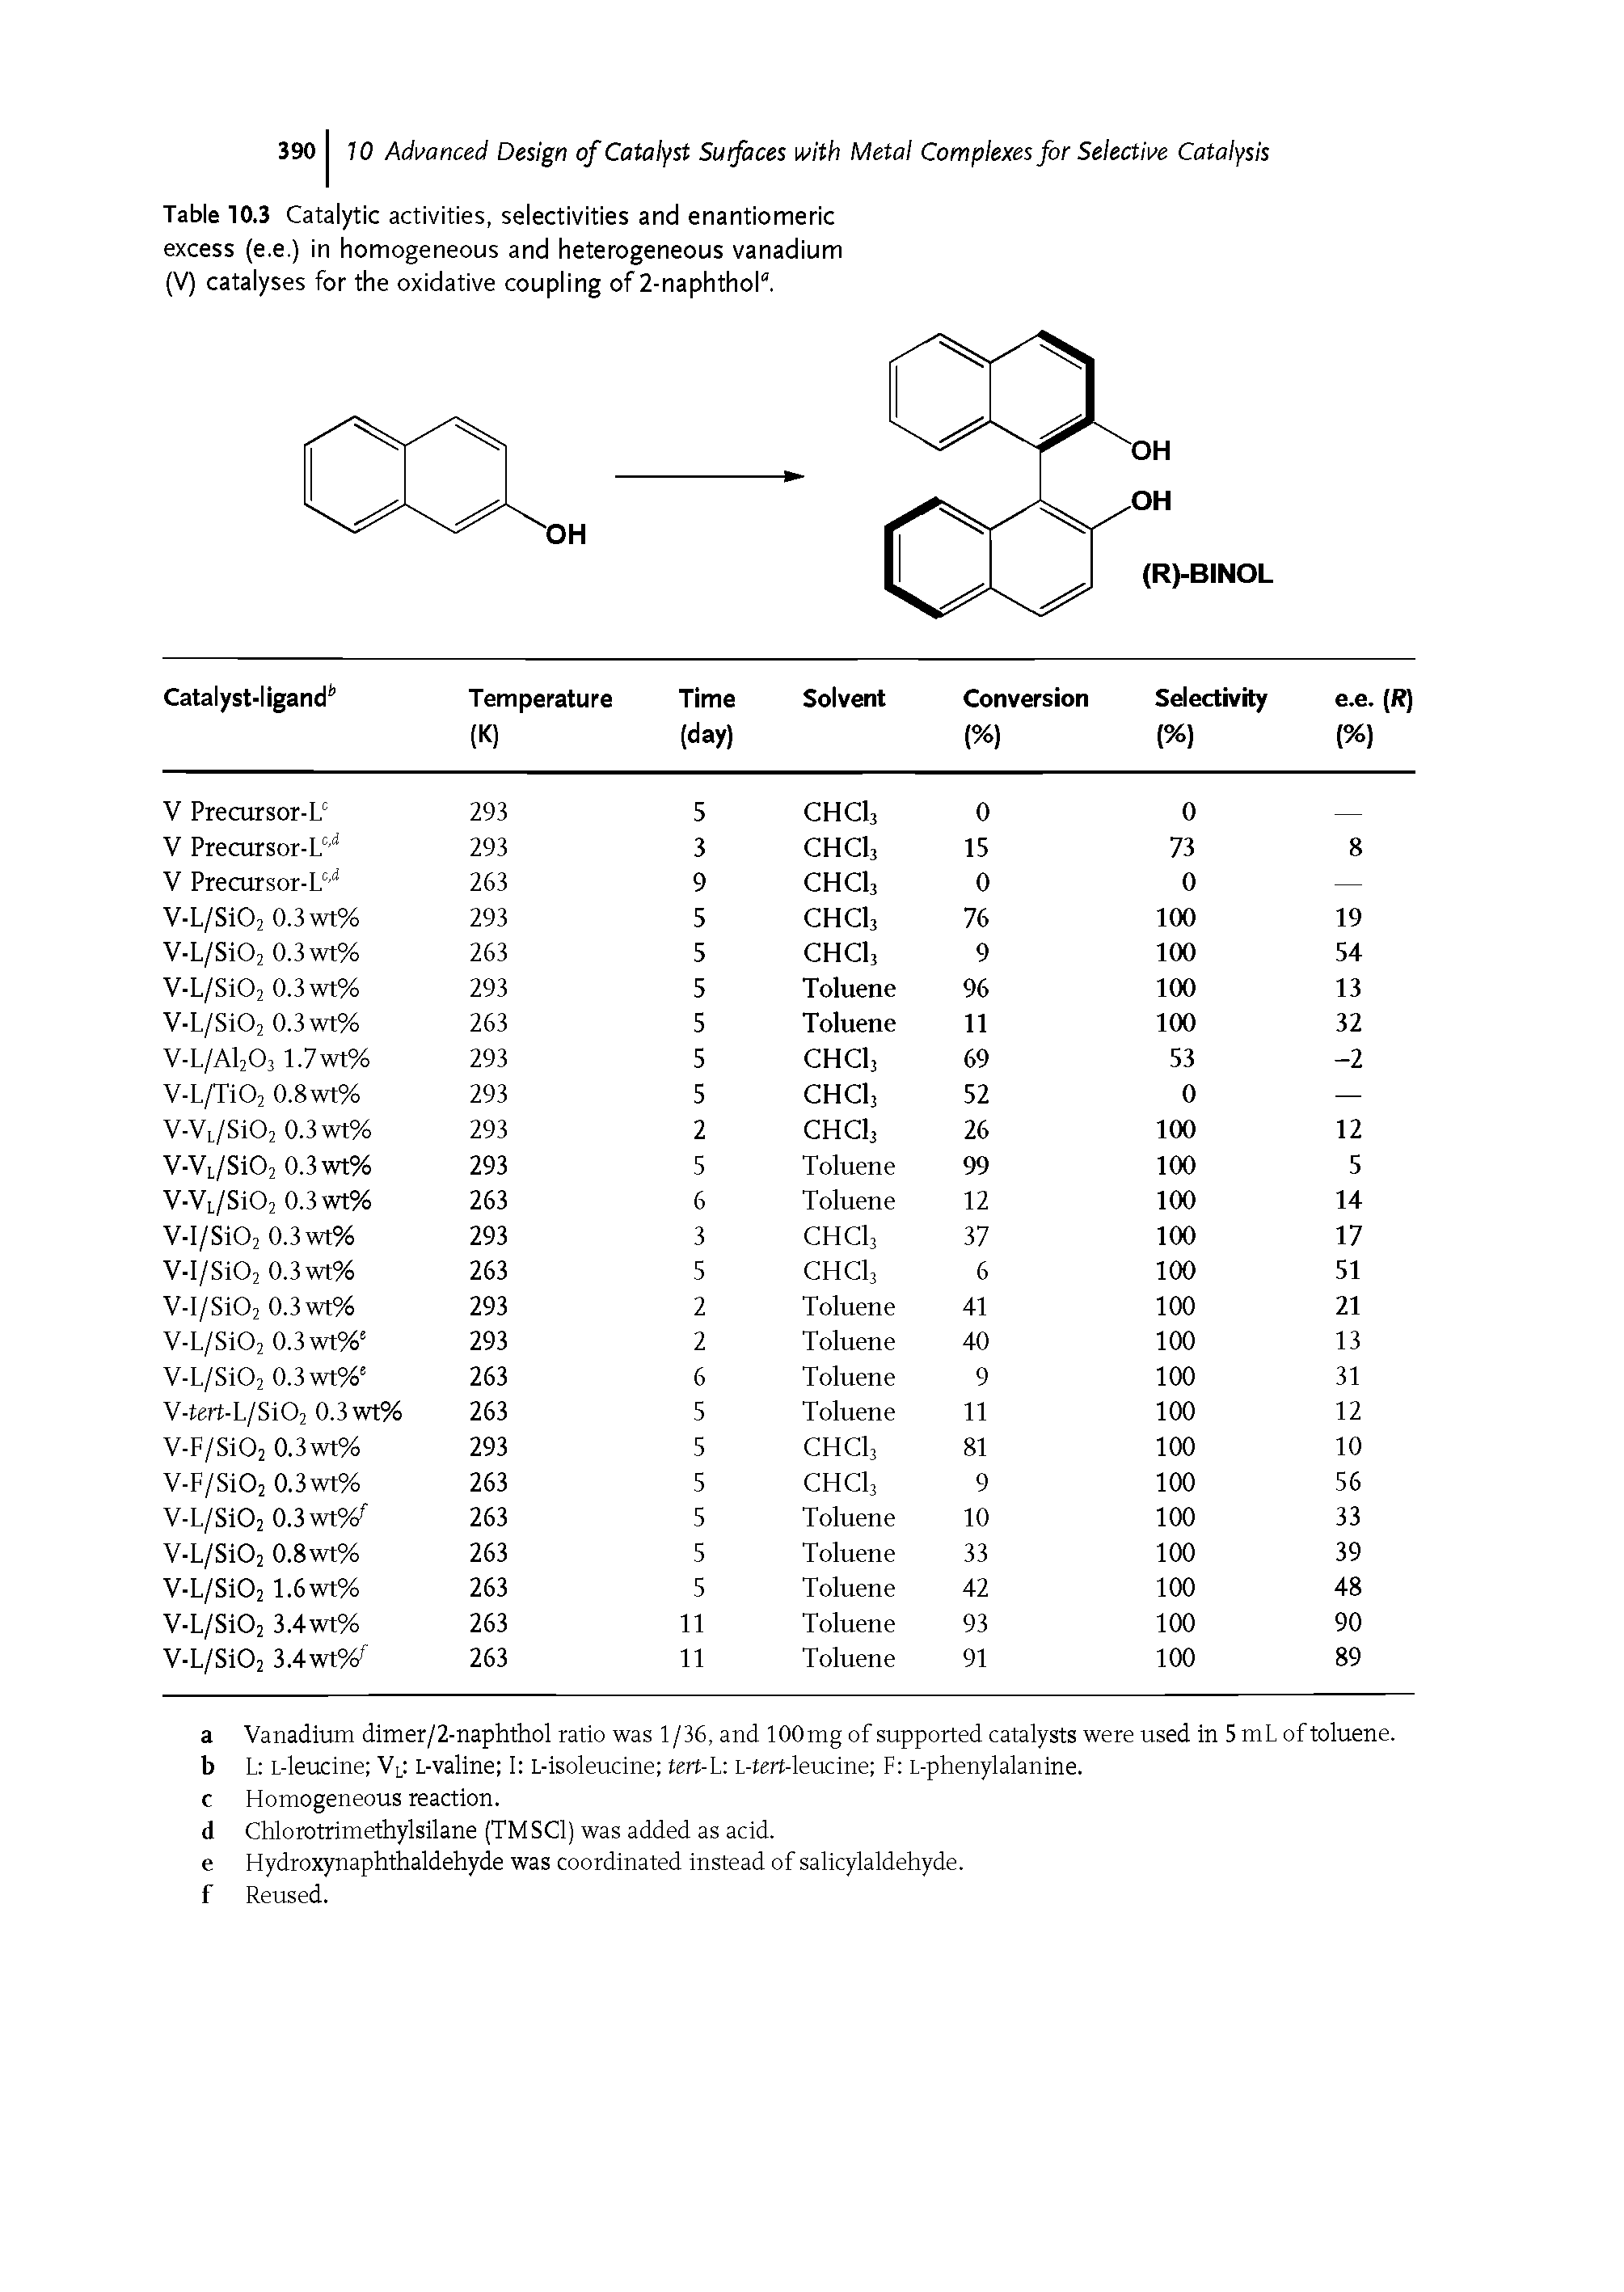 Table 10.3 Catalytic activities, selectivities and enantiomeric excess (e.e.) in homogeneous and heterogeneous vanadium (V) catalyses for the oxidative coupling of 2-naphthol .